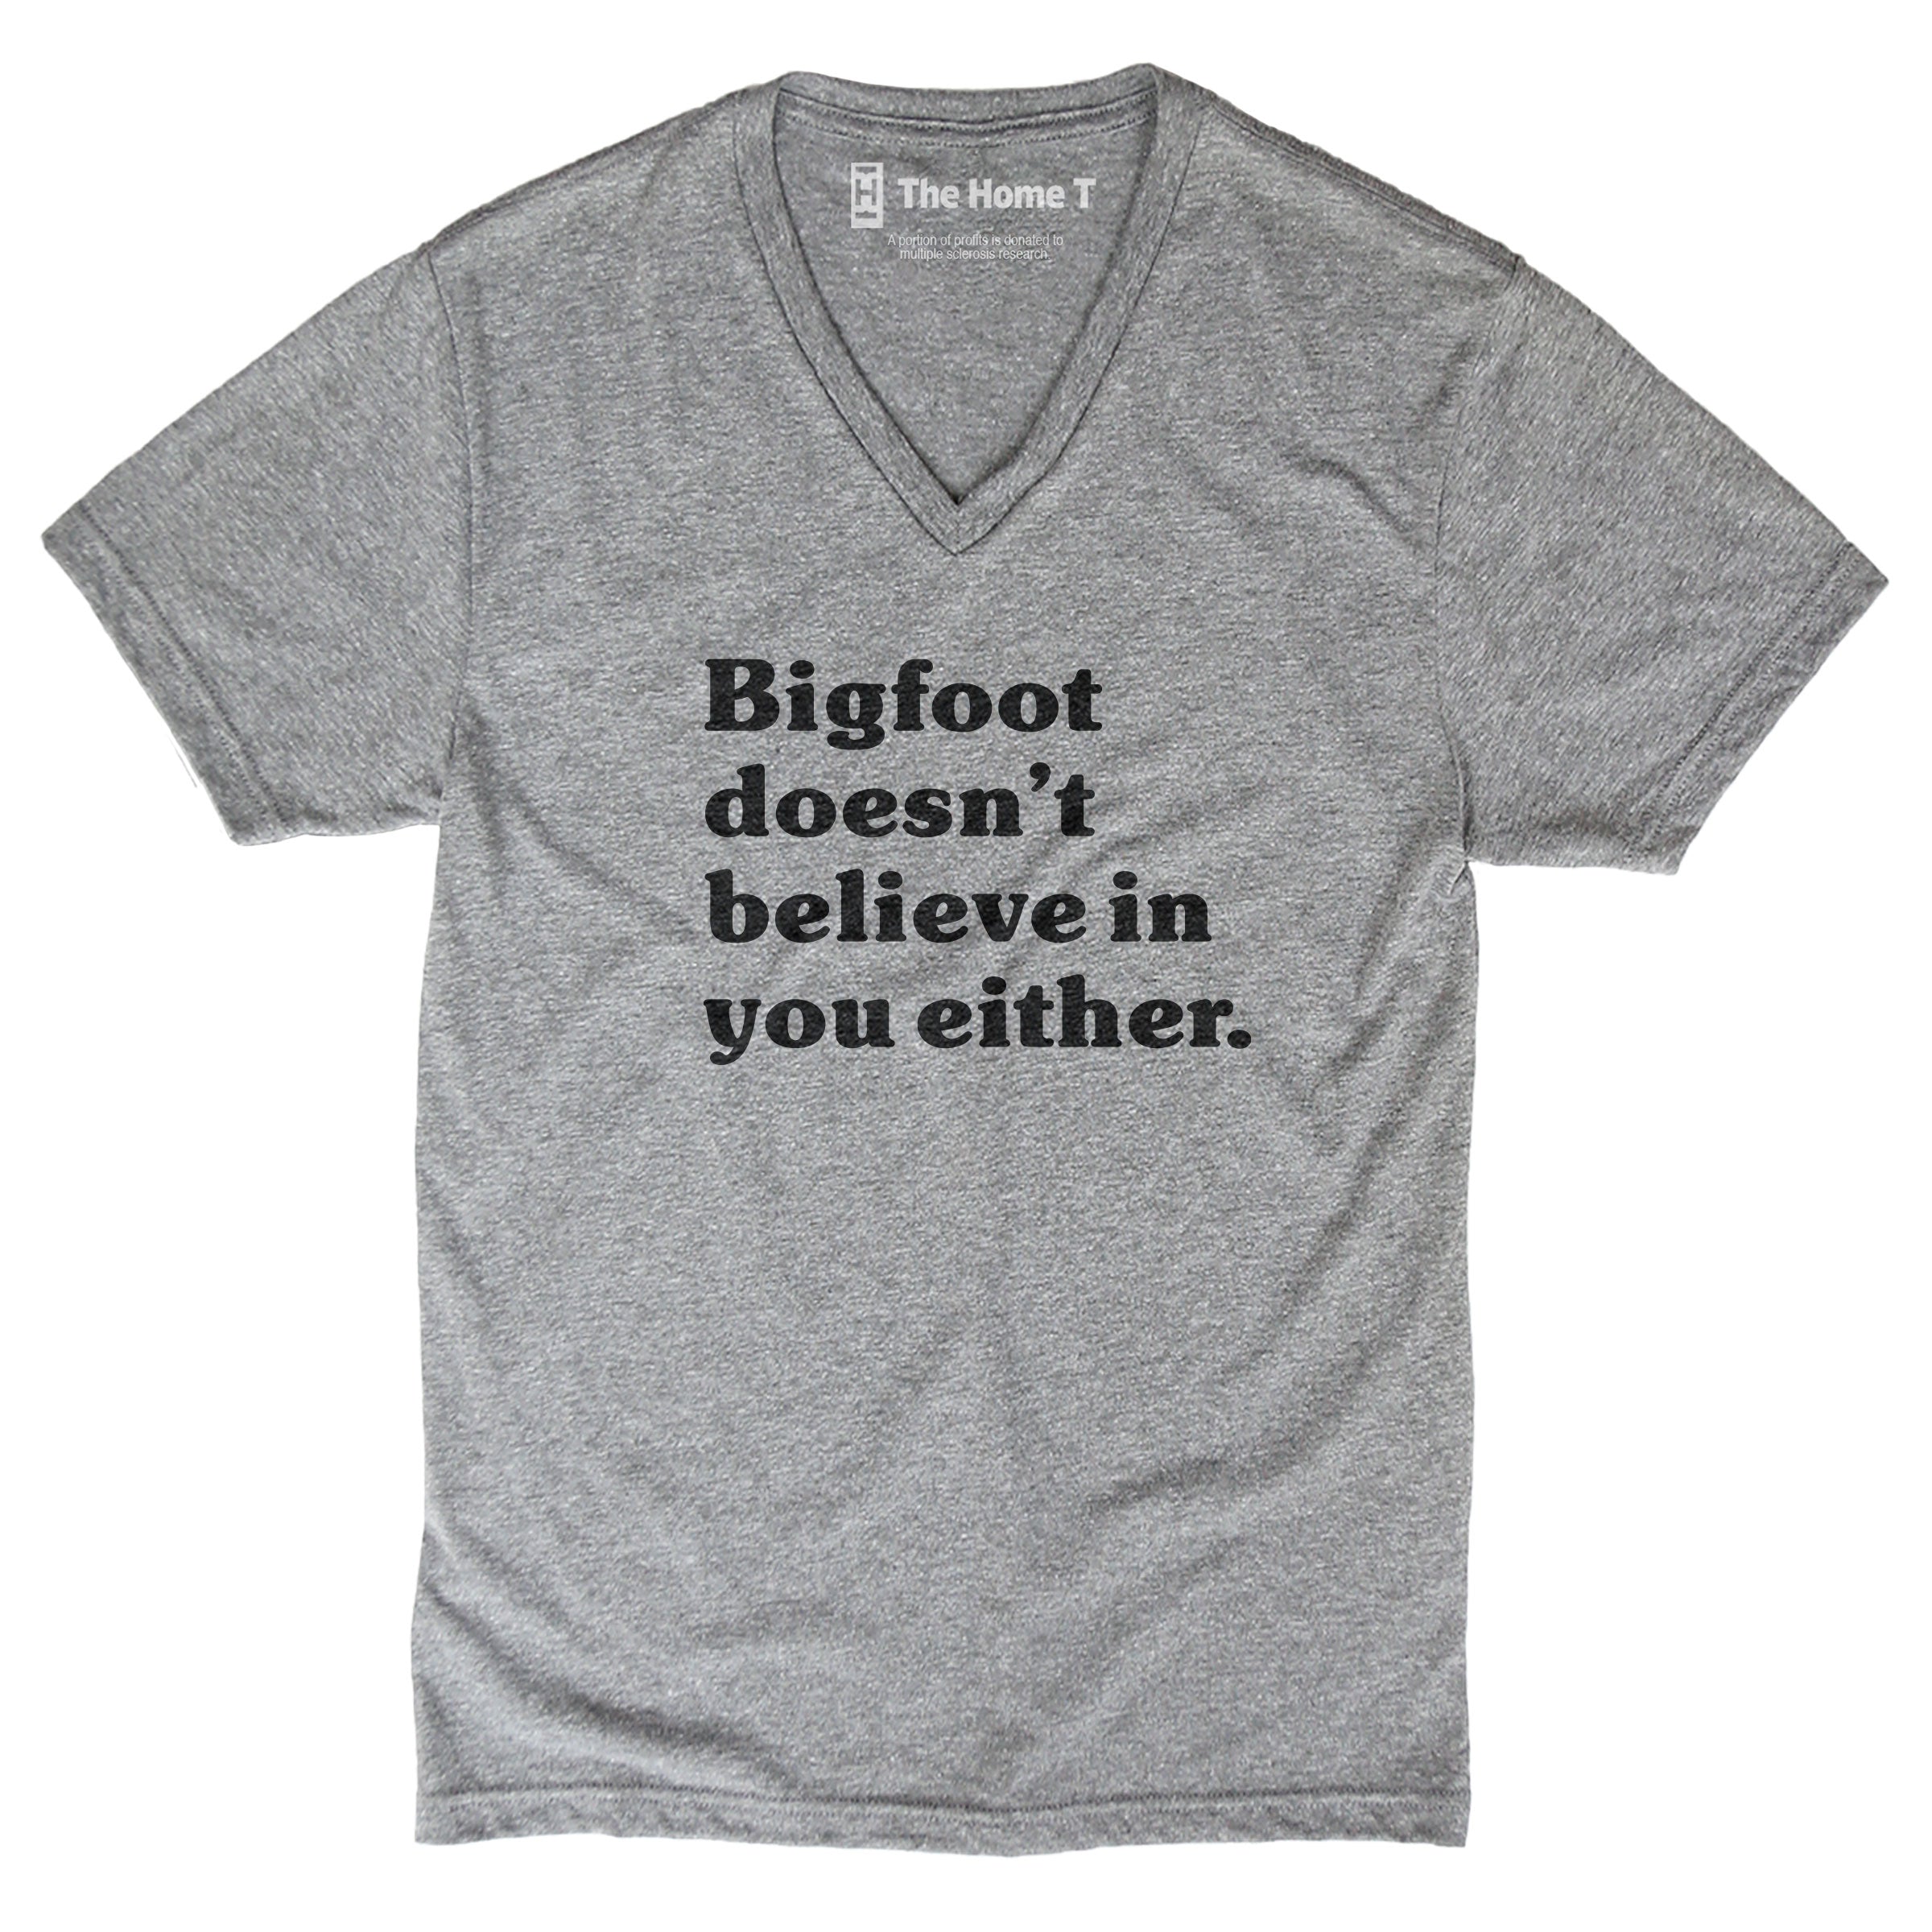 Big Foot Doesn't Believe in You Either